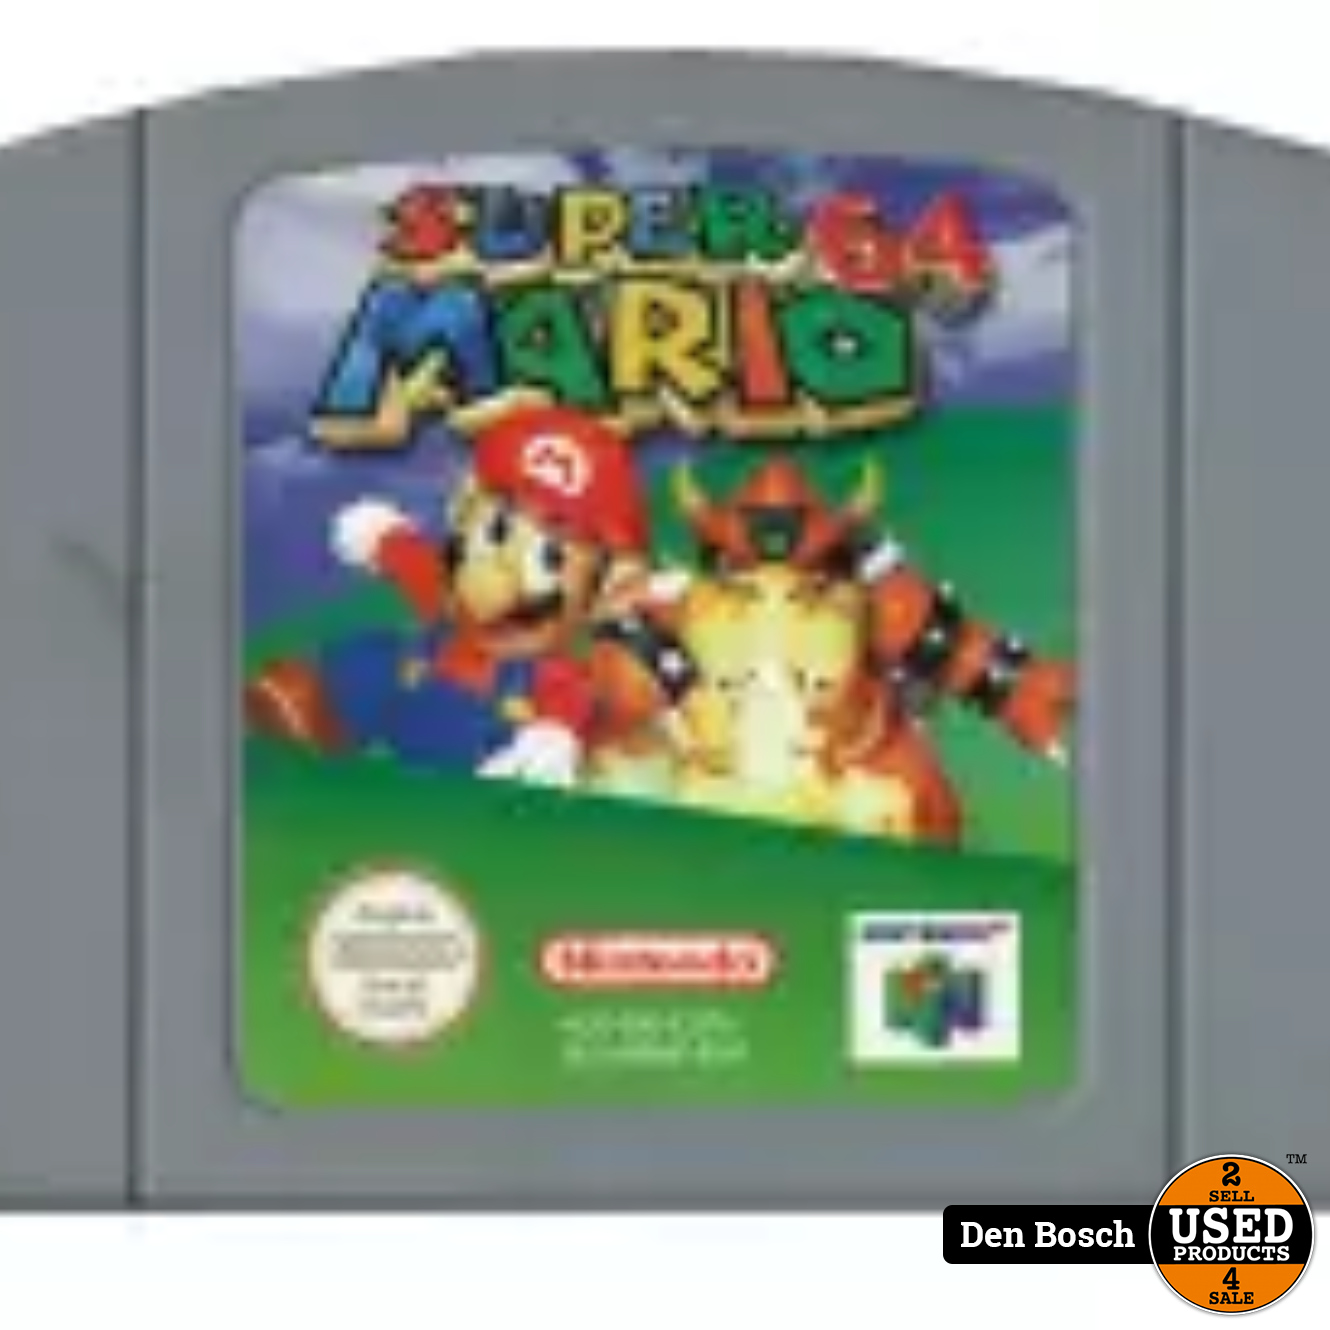 Super Mario 64 (Losse Cartridge) - N64 Game - Used Products Den